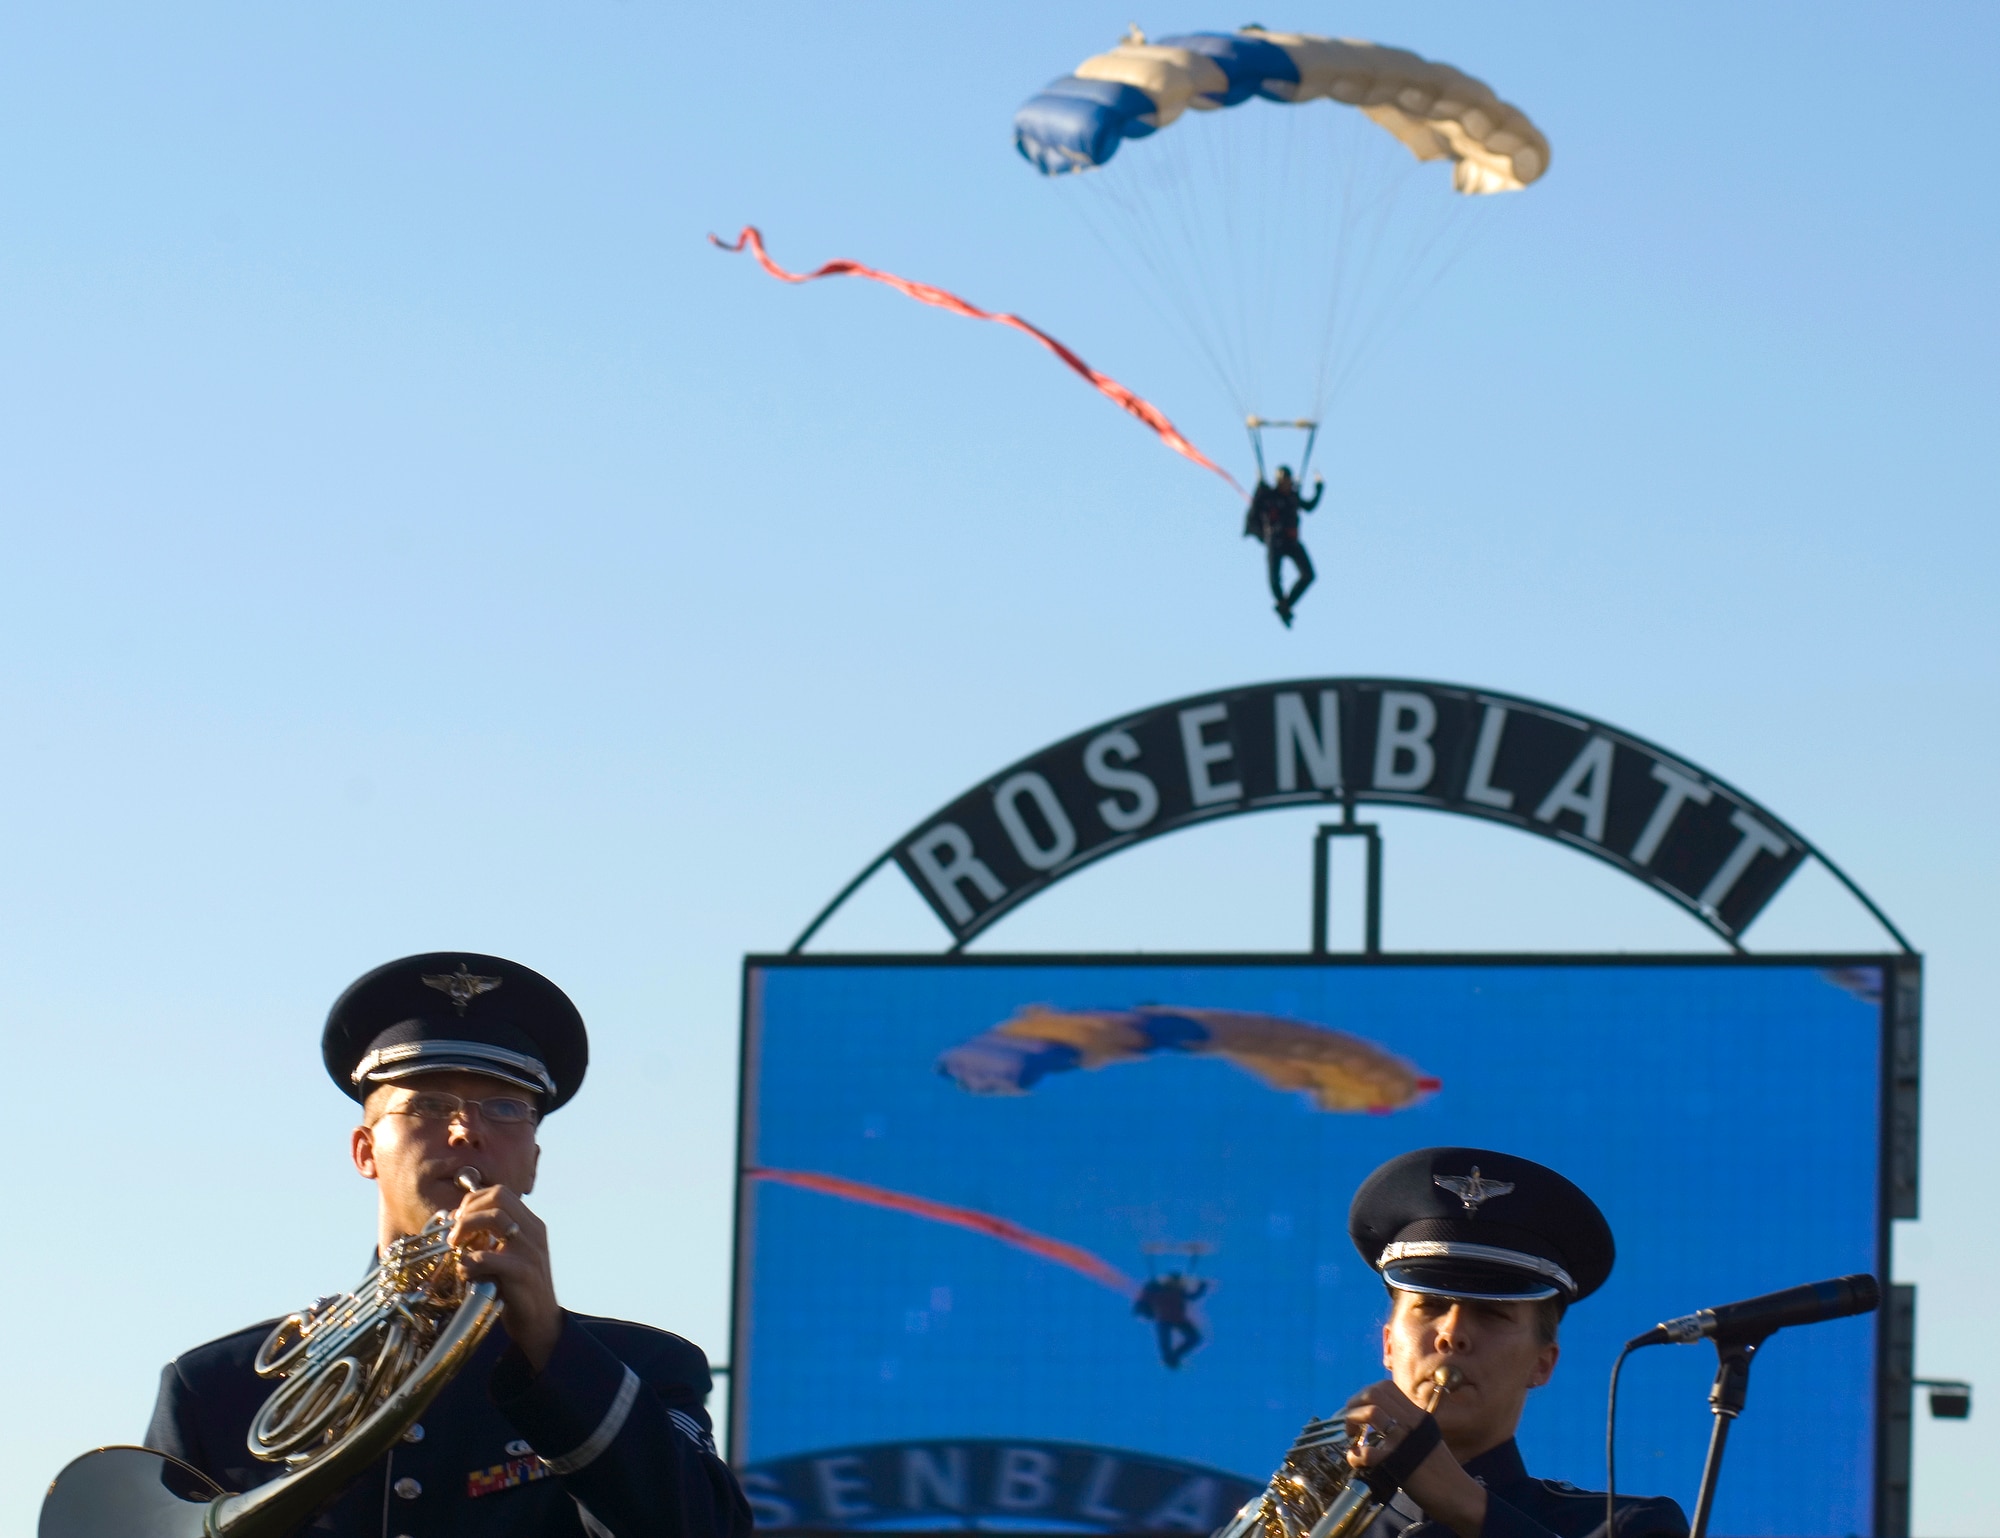 Members of the Heartland of America Band play while the U.S. Air Force Academy Wings of Blue jump team fly into Rosenblatt Stadium during opening ceremonies for Air Force Week in the Heartland Aug. 9 in Omaha, Neb. The week is designed to broaden awareness of the Air Force's role in the war on terrorism and strengthen support for Airmen serving worldwide in defense of freedom. (U.S. Air Force photo/Staff Sgt. Bennie J. Davis III)